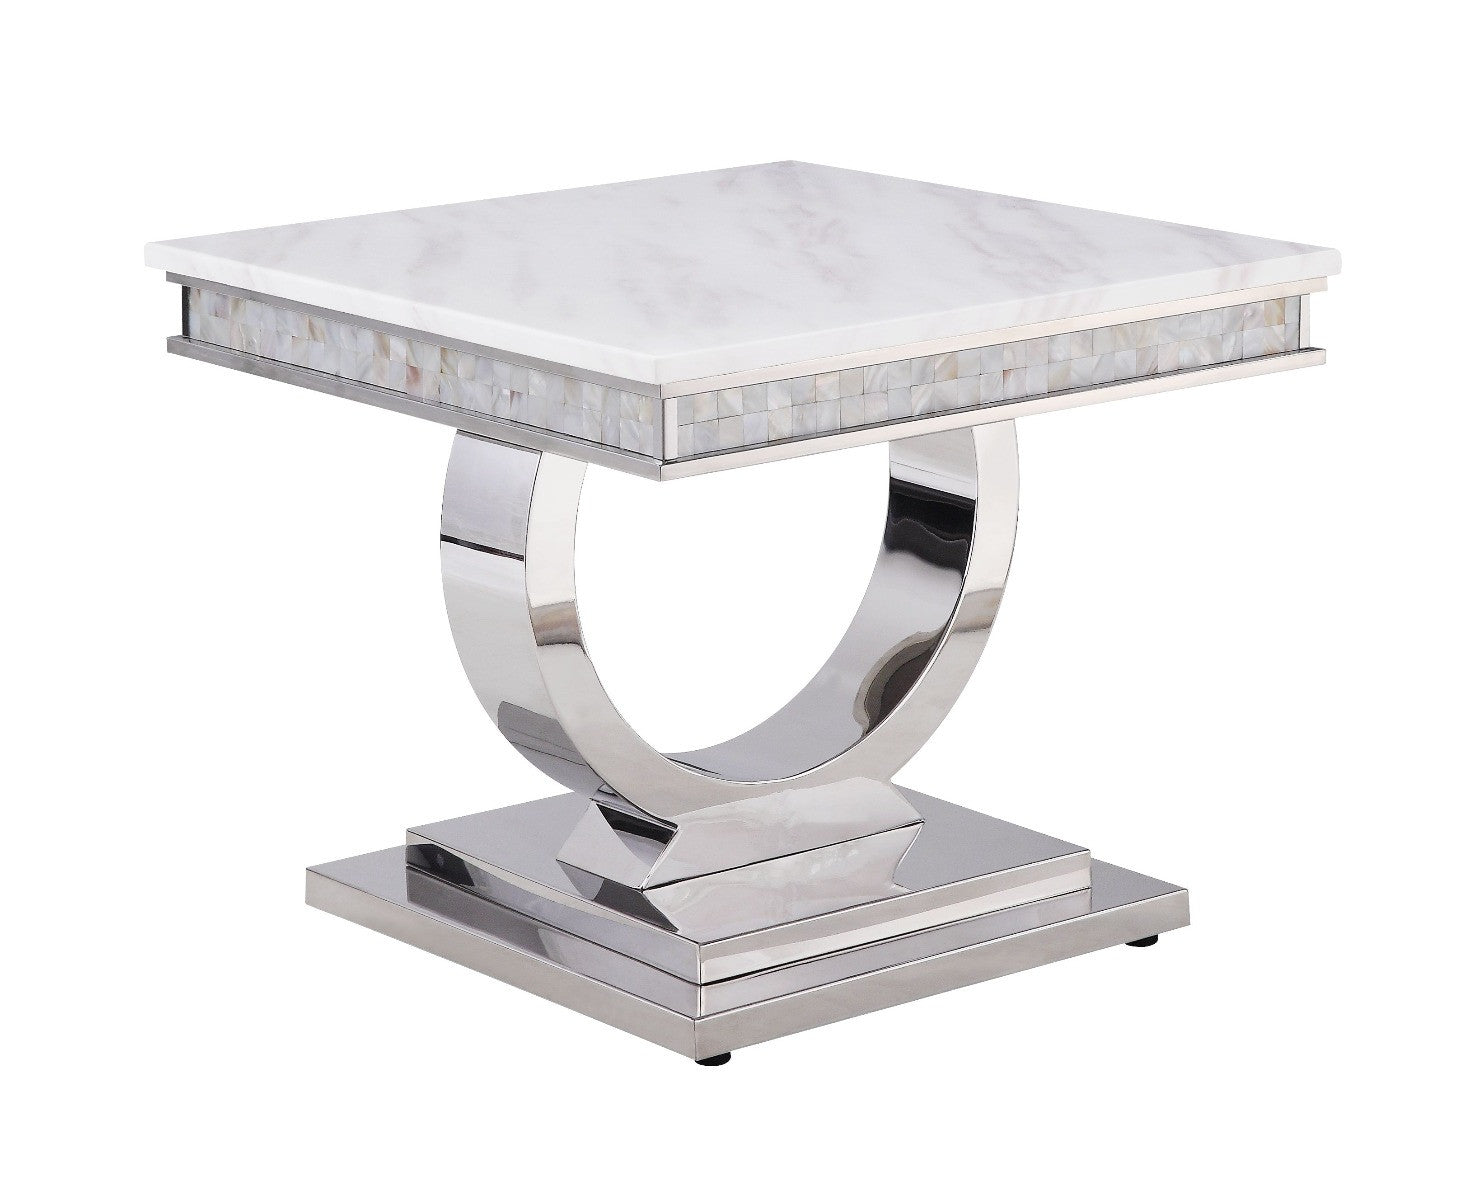 20" Silver And White Marble Look Stainless Steel Square End Table